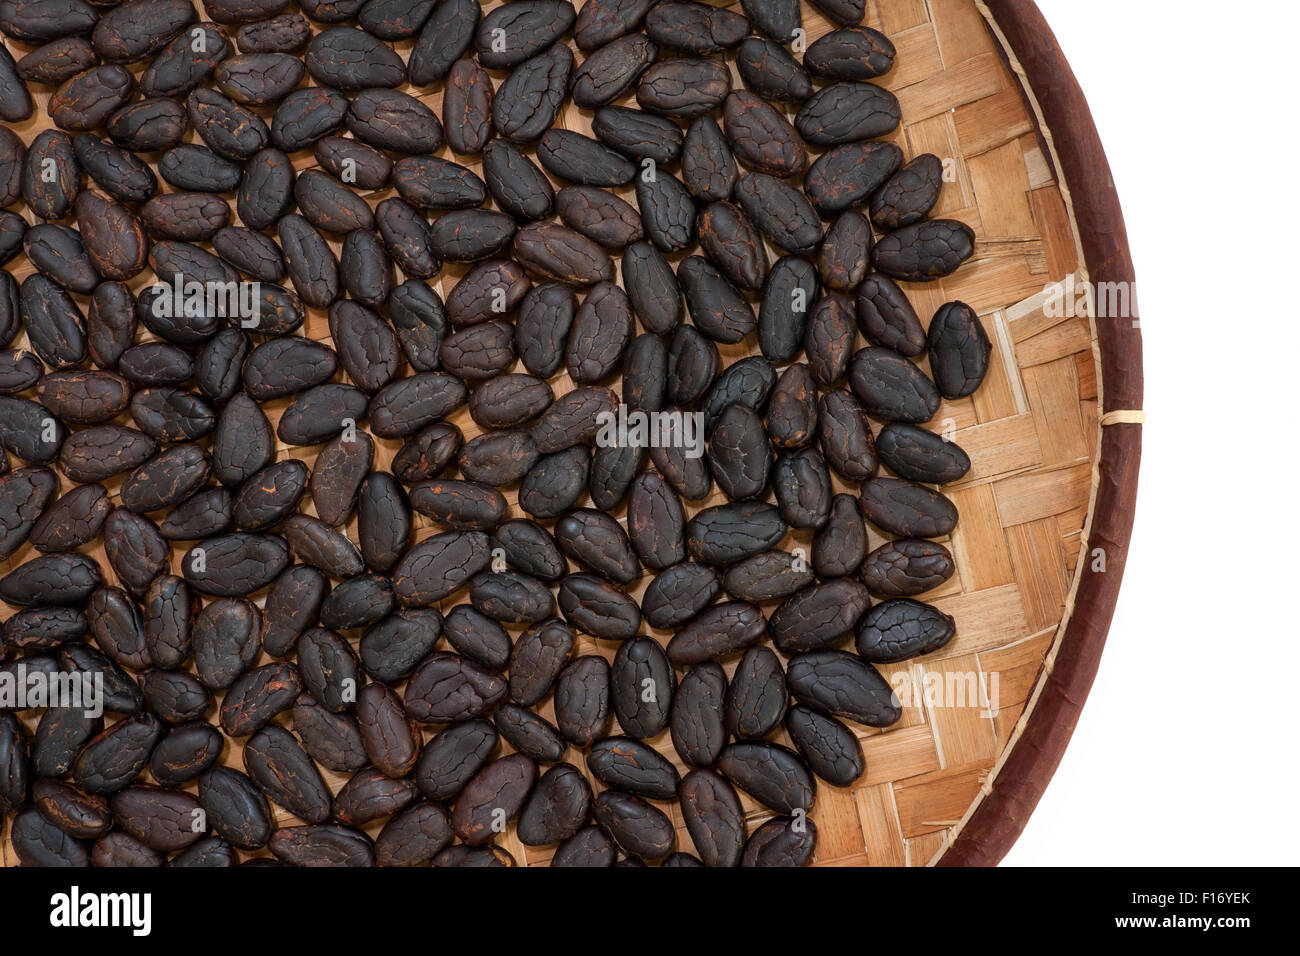 Cocoa beans from Madagascar in craft basket. Stock Photo